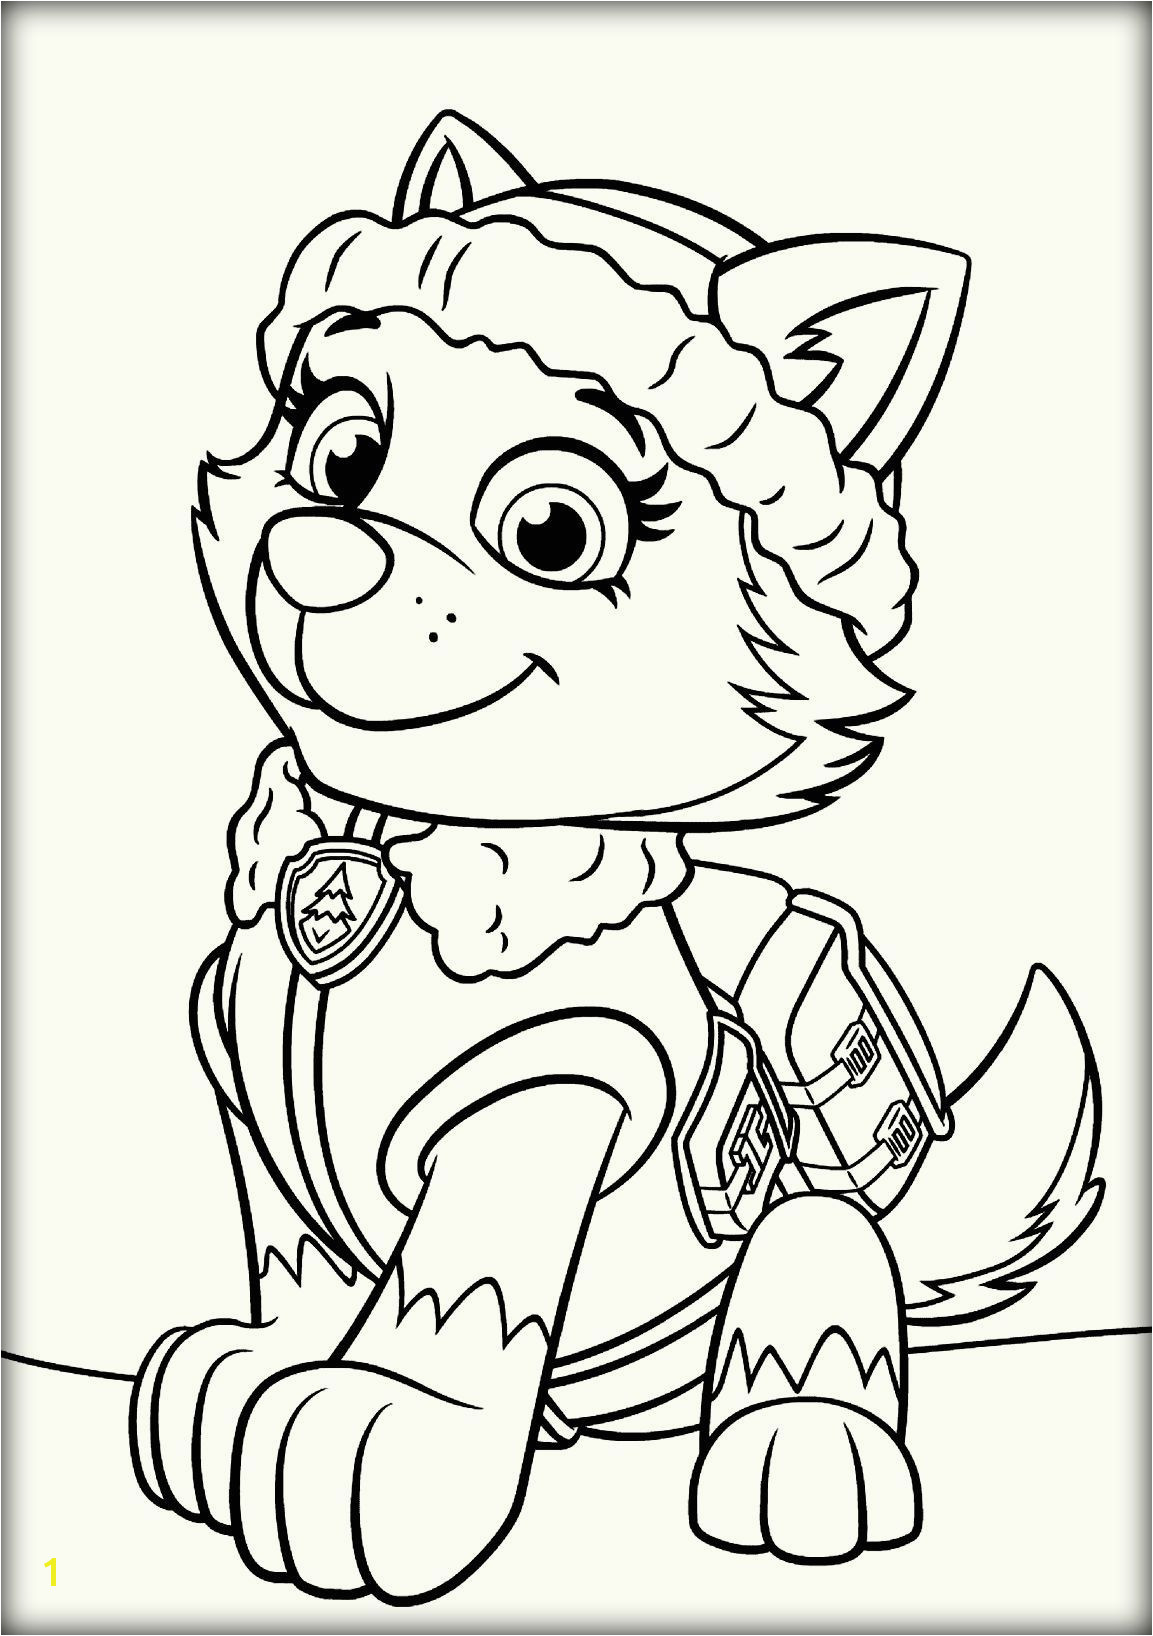 Paw Patrol Free Coloring Pages to Print Paw Patrol Everest Coloring Pages Coloring Pages